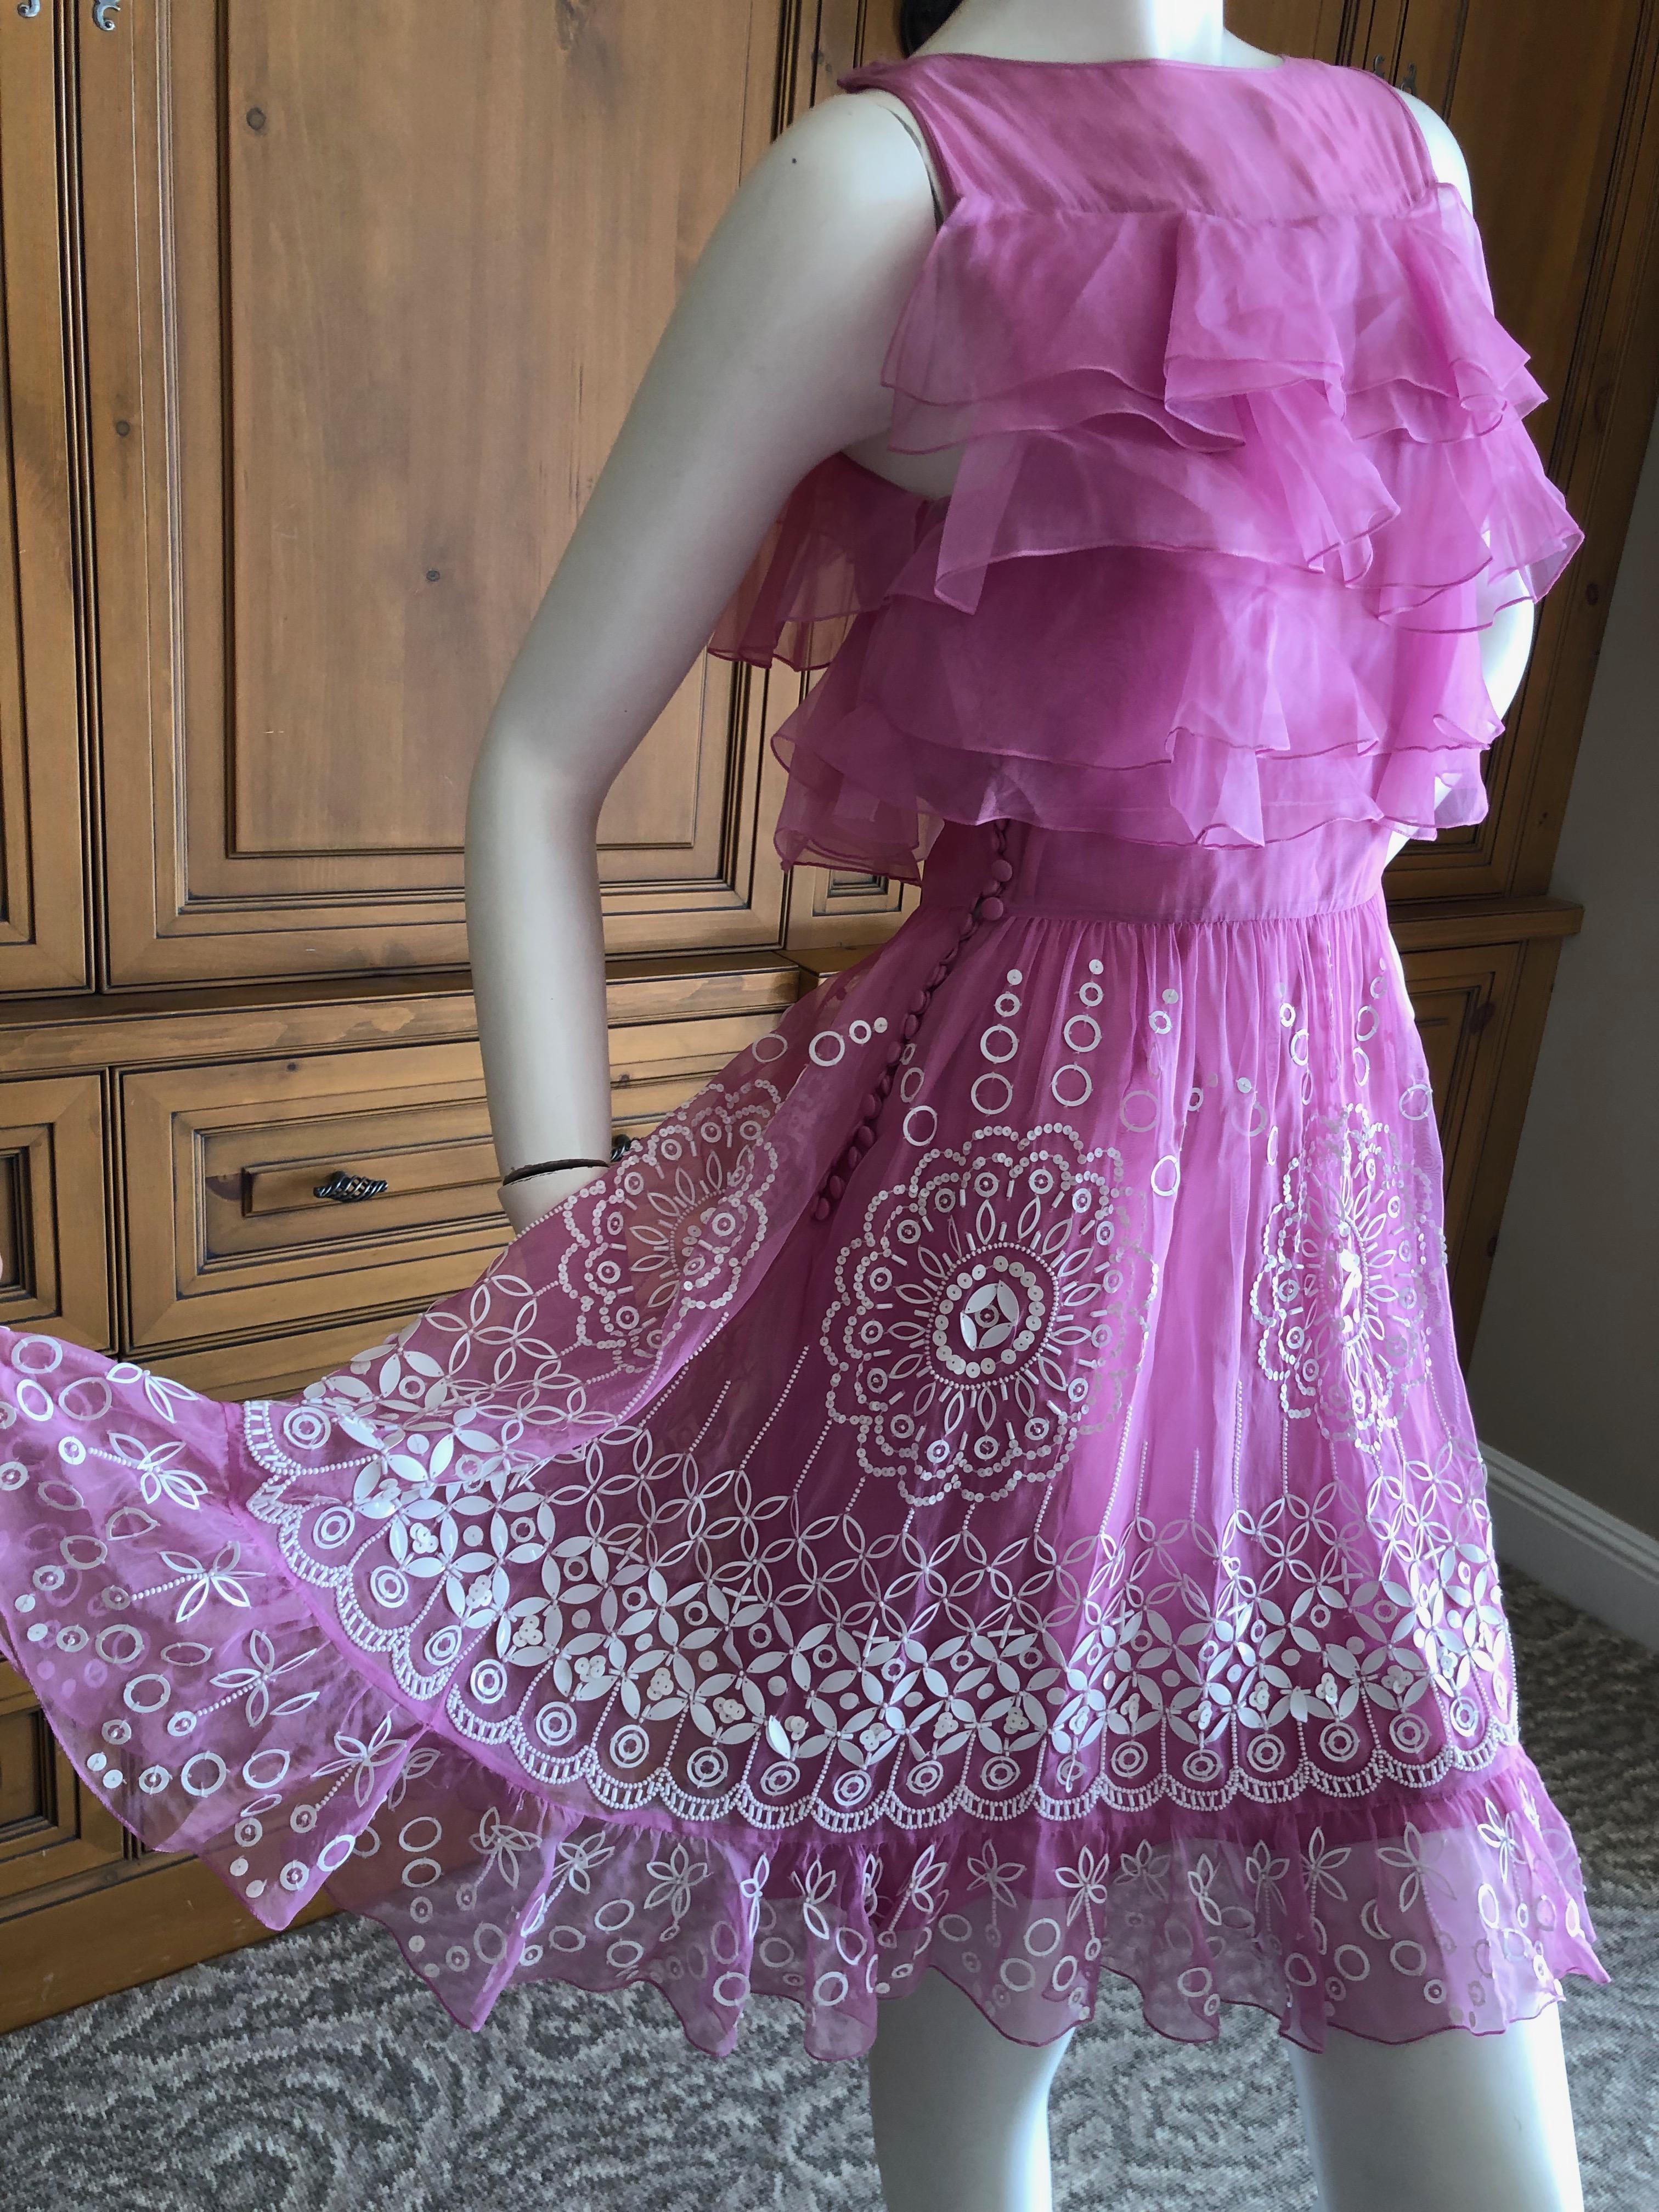 Christian Dior by John Galliano Pink Silk Dress with White Embellishments In Good Condition For Sale In Cloverdale, CA